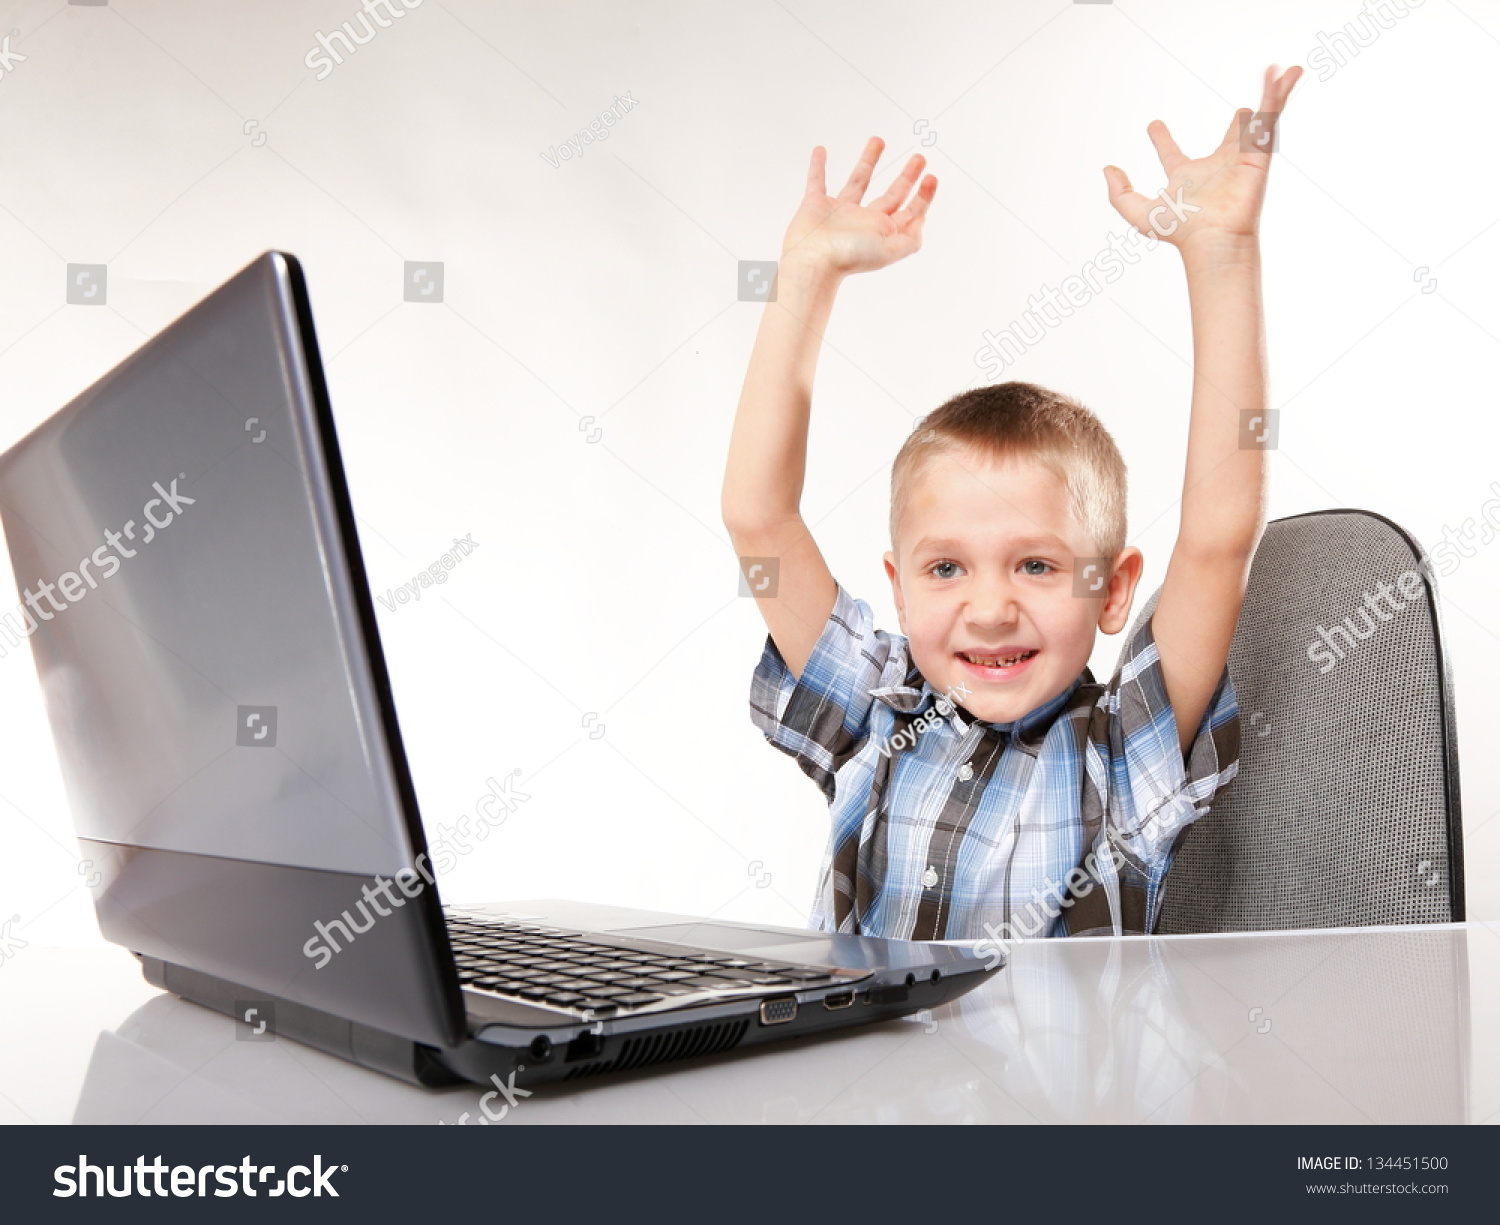 Triumphing child boy with a laptop notebook computer isolated on white background. Computer addiction. #134451500